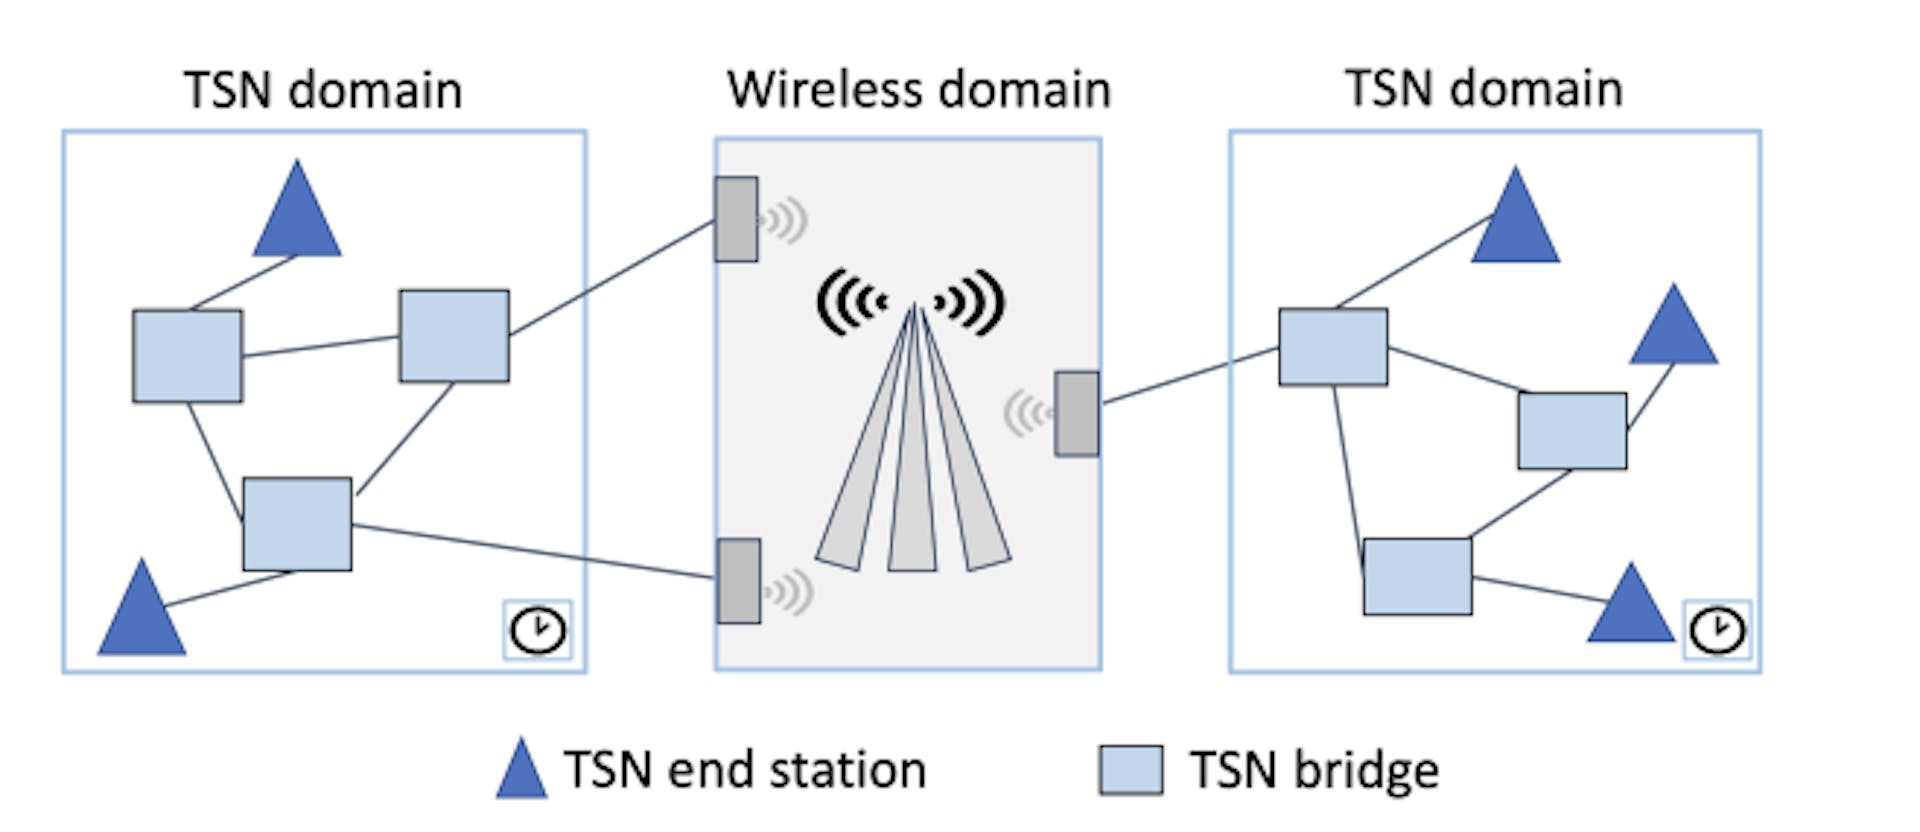 Fig. 7: An illustration for the integration of a wireless domain with TSN domains.